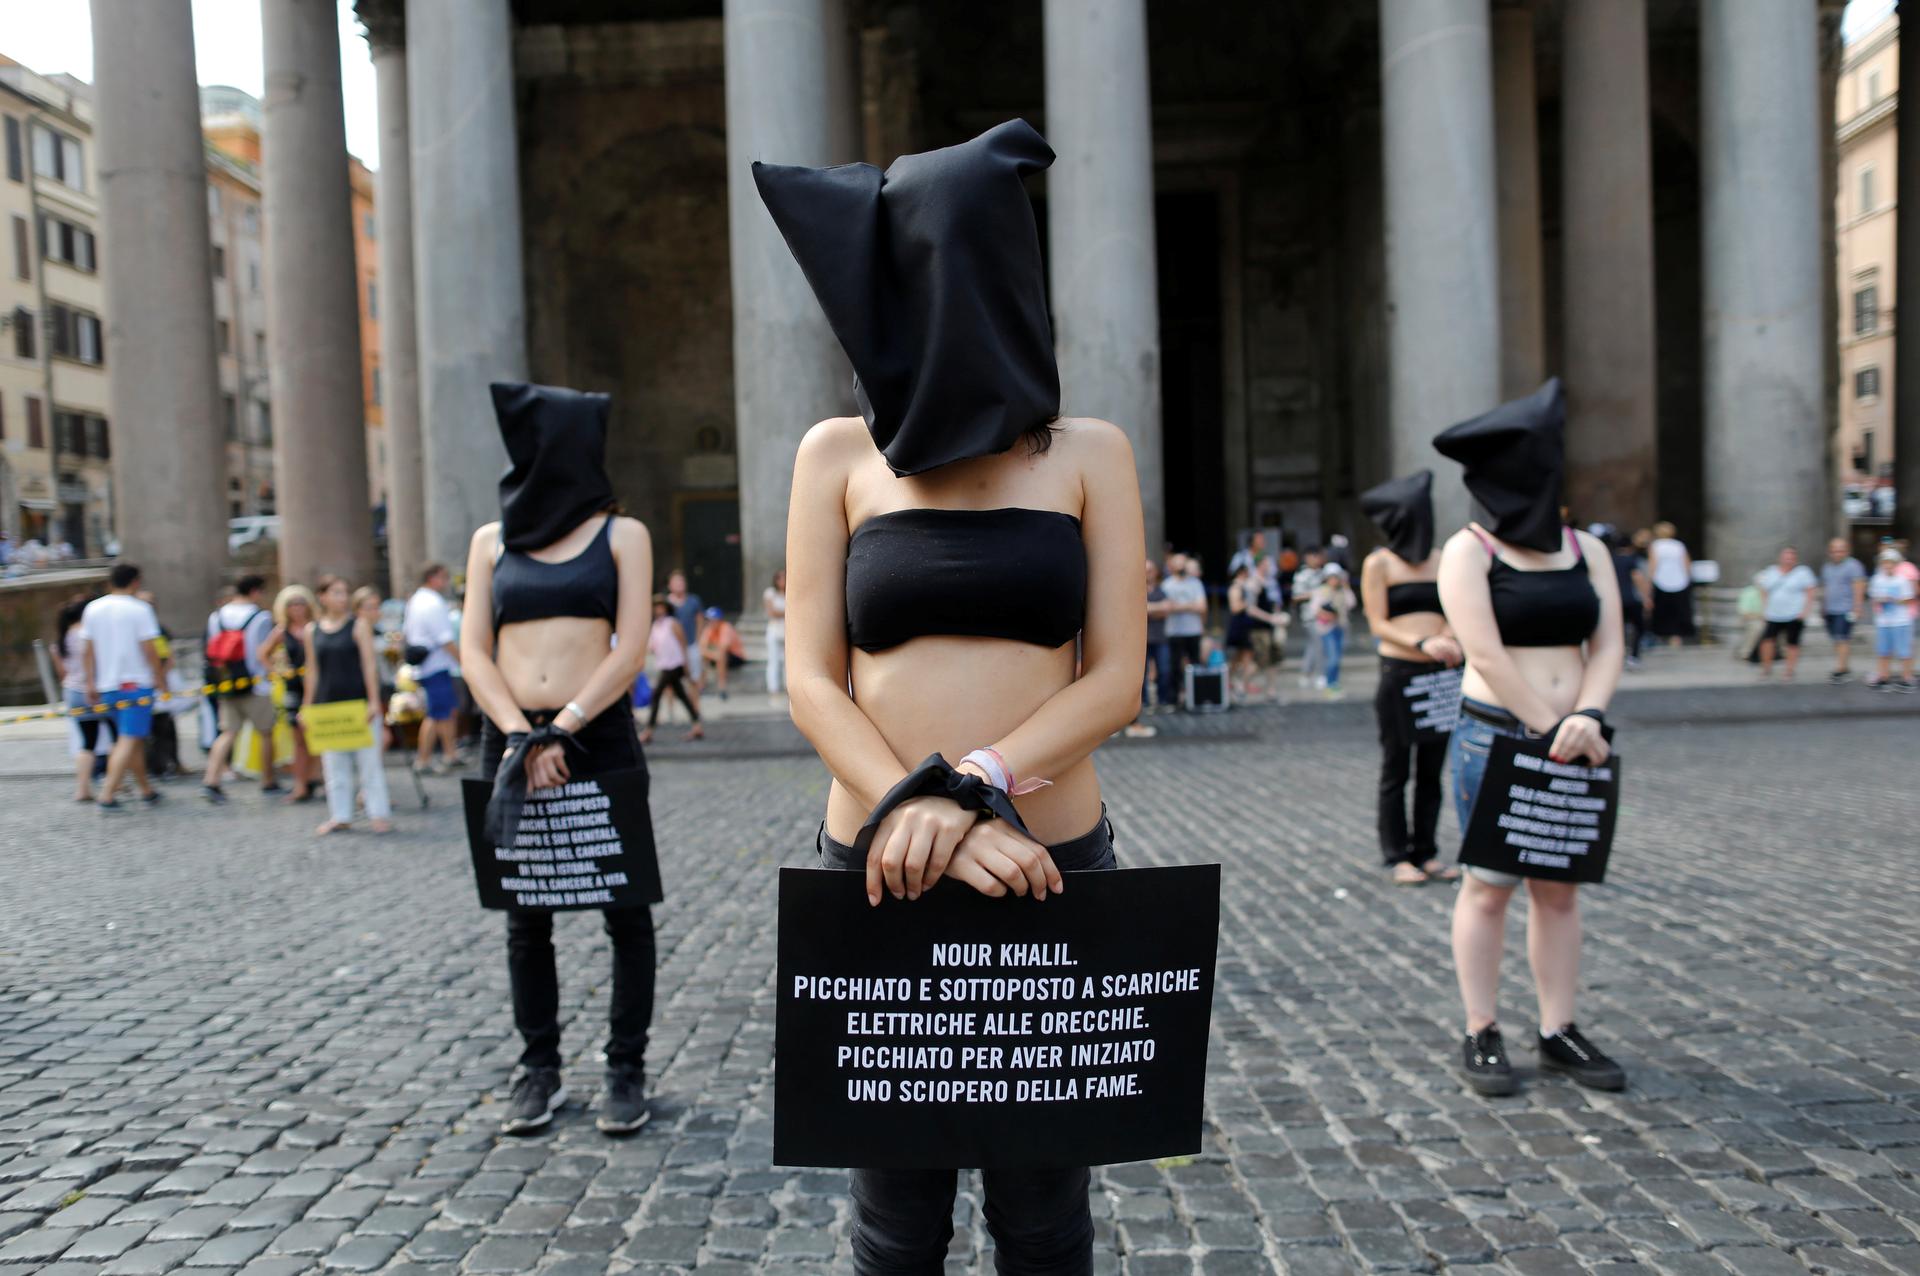 Amnesty International activists take part in a performance to protest against enforced disappearance in downtown Rome, Italy July 13, 2016. REUTERS/Tony Gentile